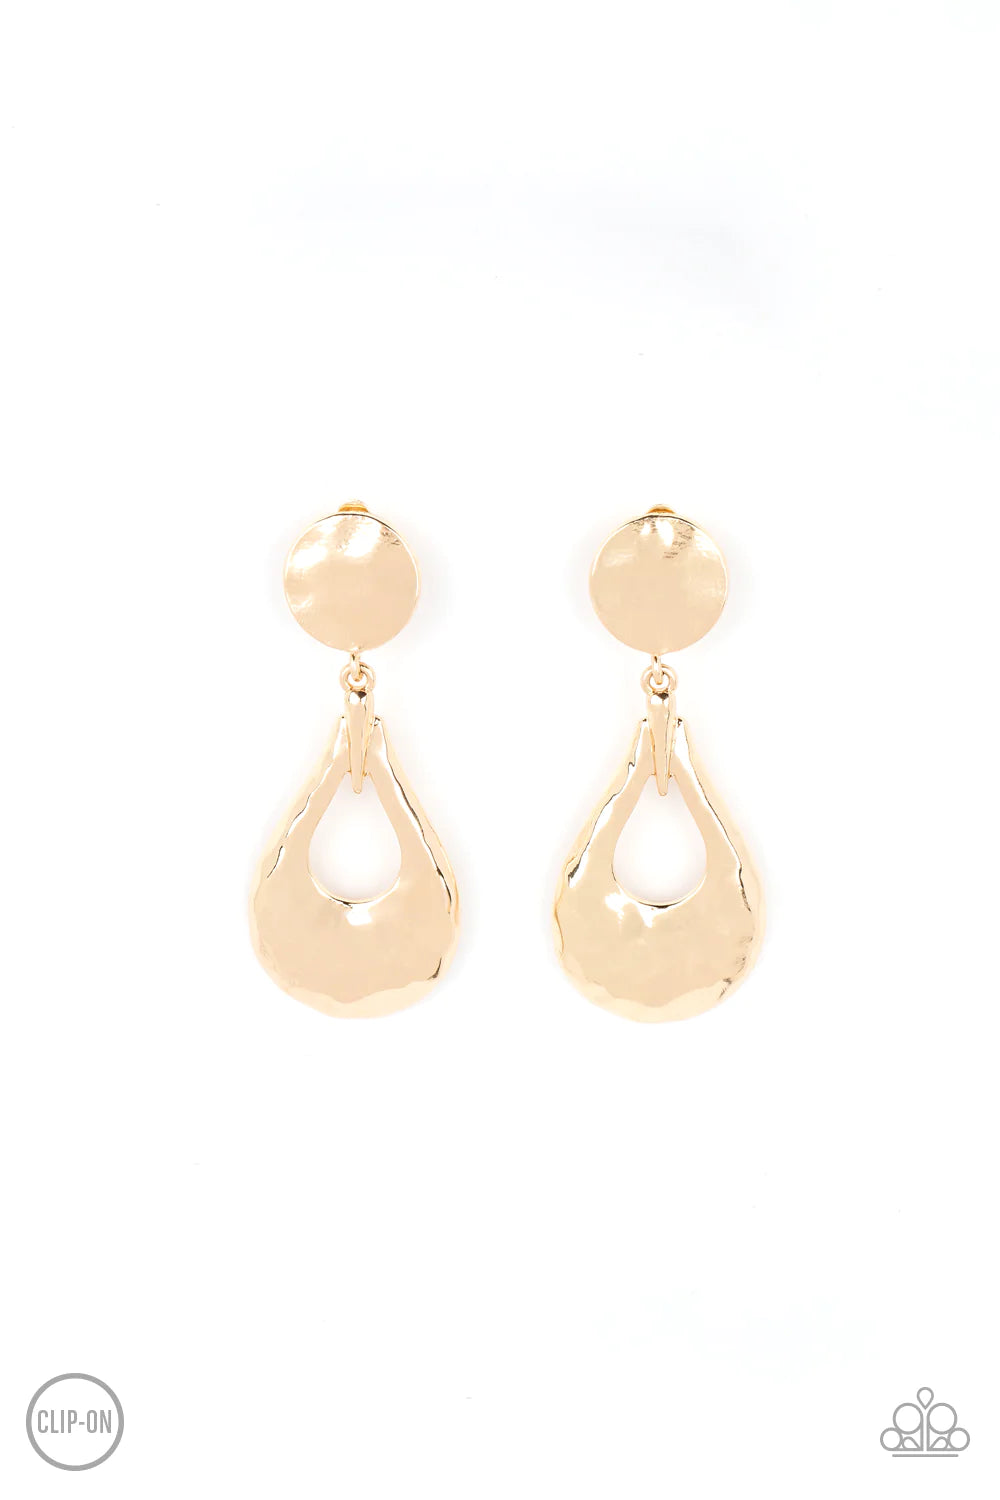 Paparazzi Accessories Metallic Magic - Gold A hammered gold teardrop swings from the bottom of a hammered gold disc, resulting in monochromatic magic. Earring attaches to a standard clip-on fitting. Sold as one pair of clip-on earrings.